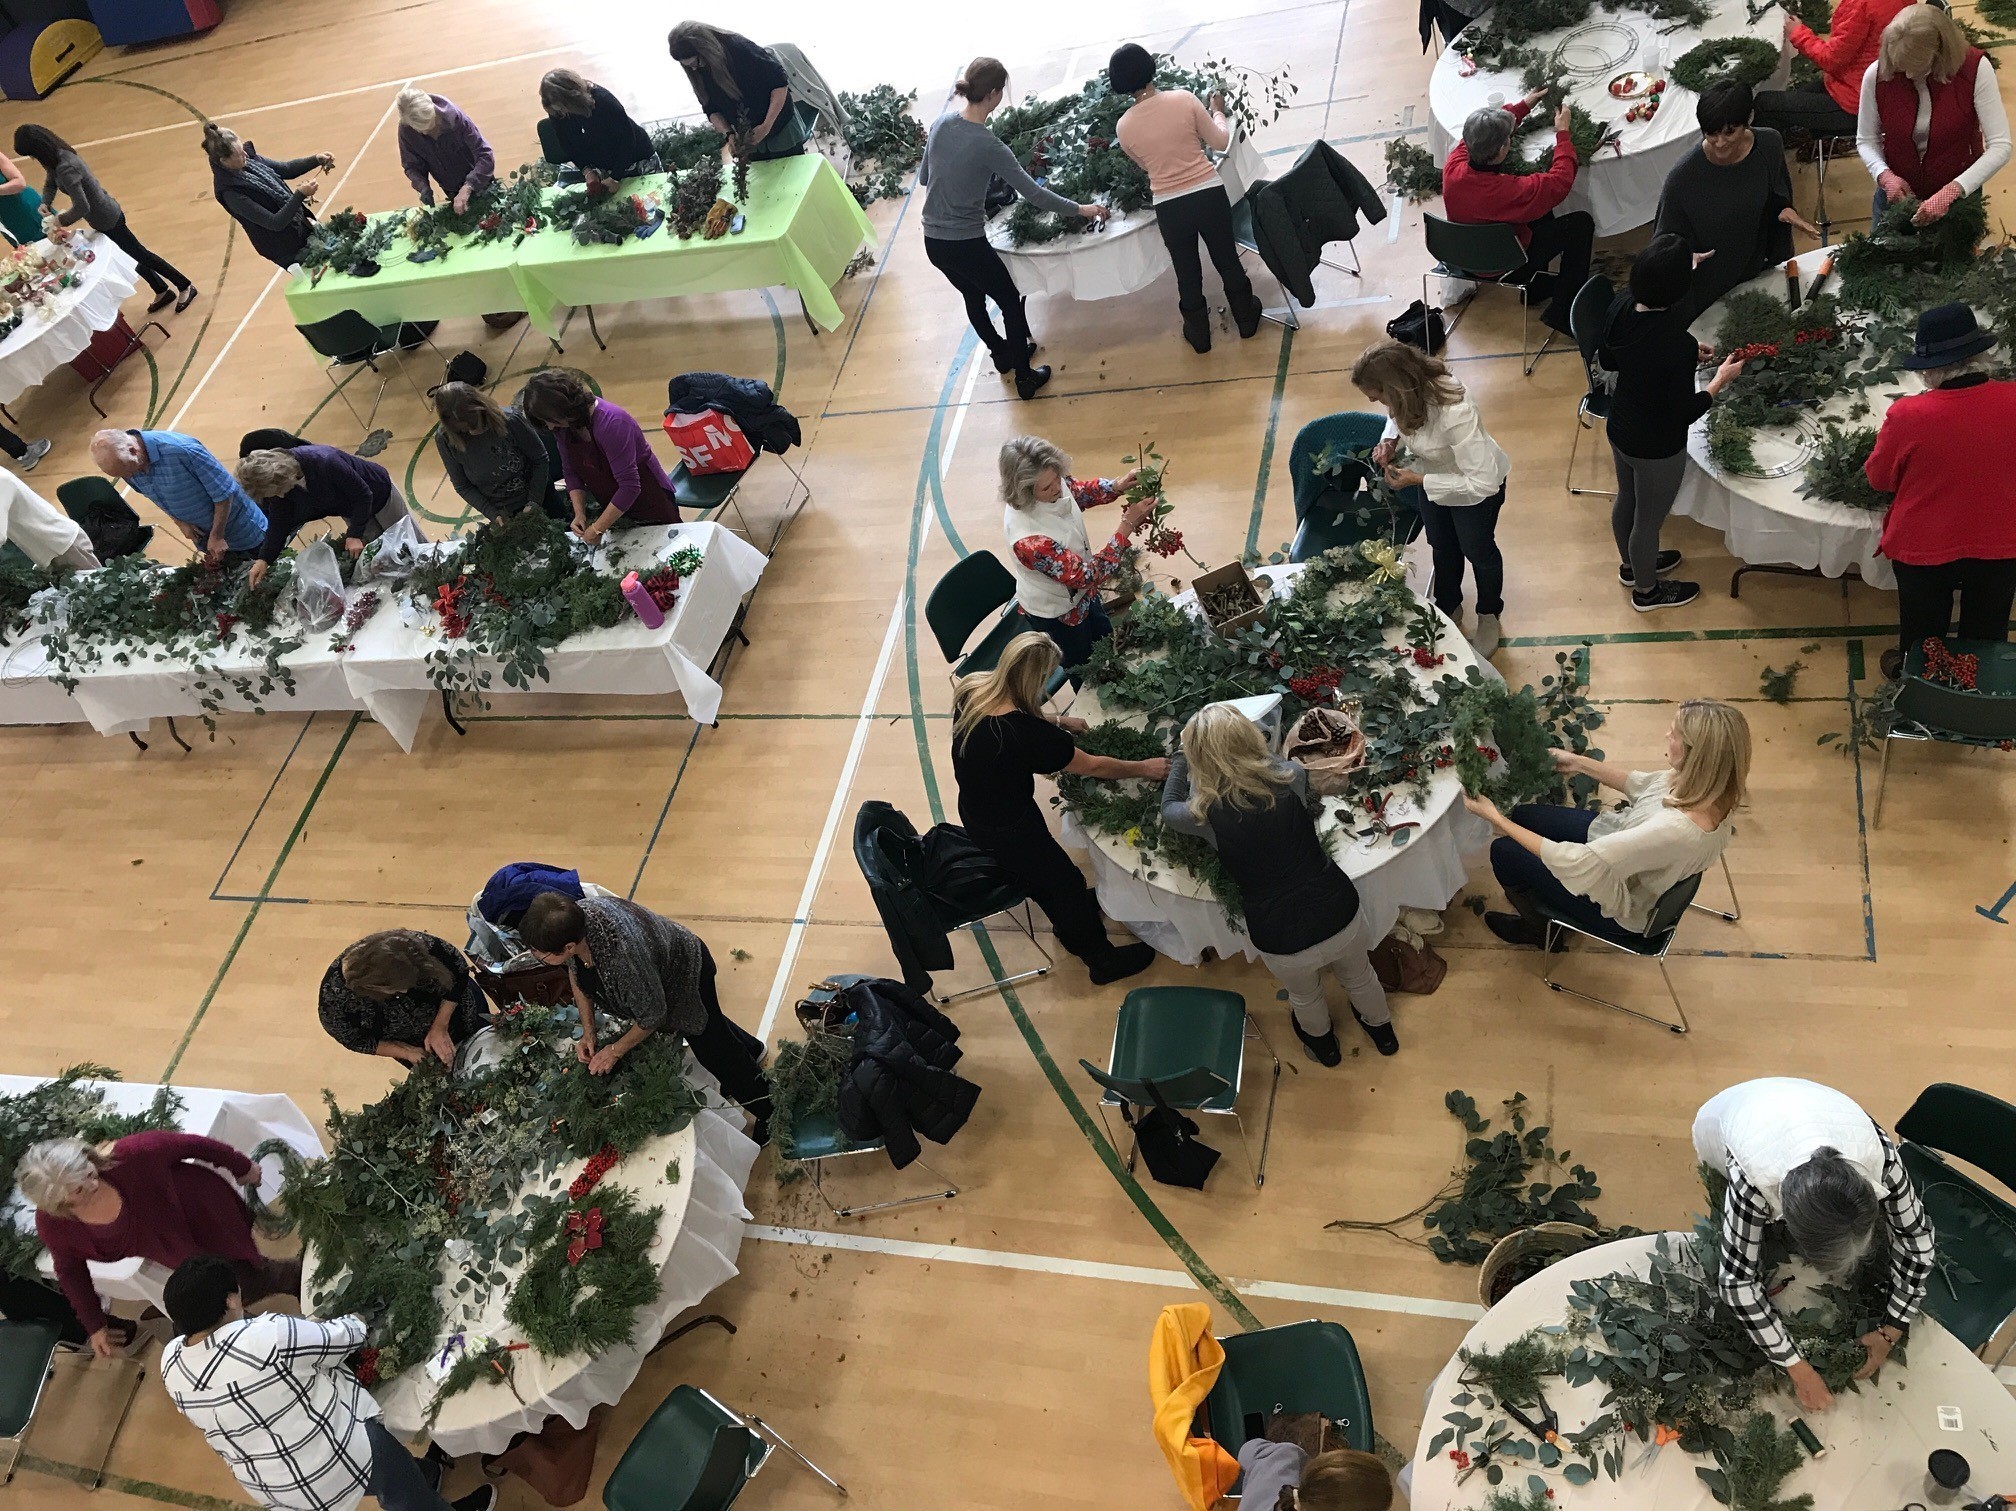 Wreath makers at work.